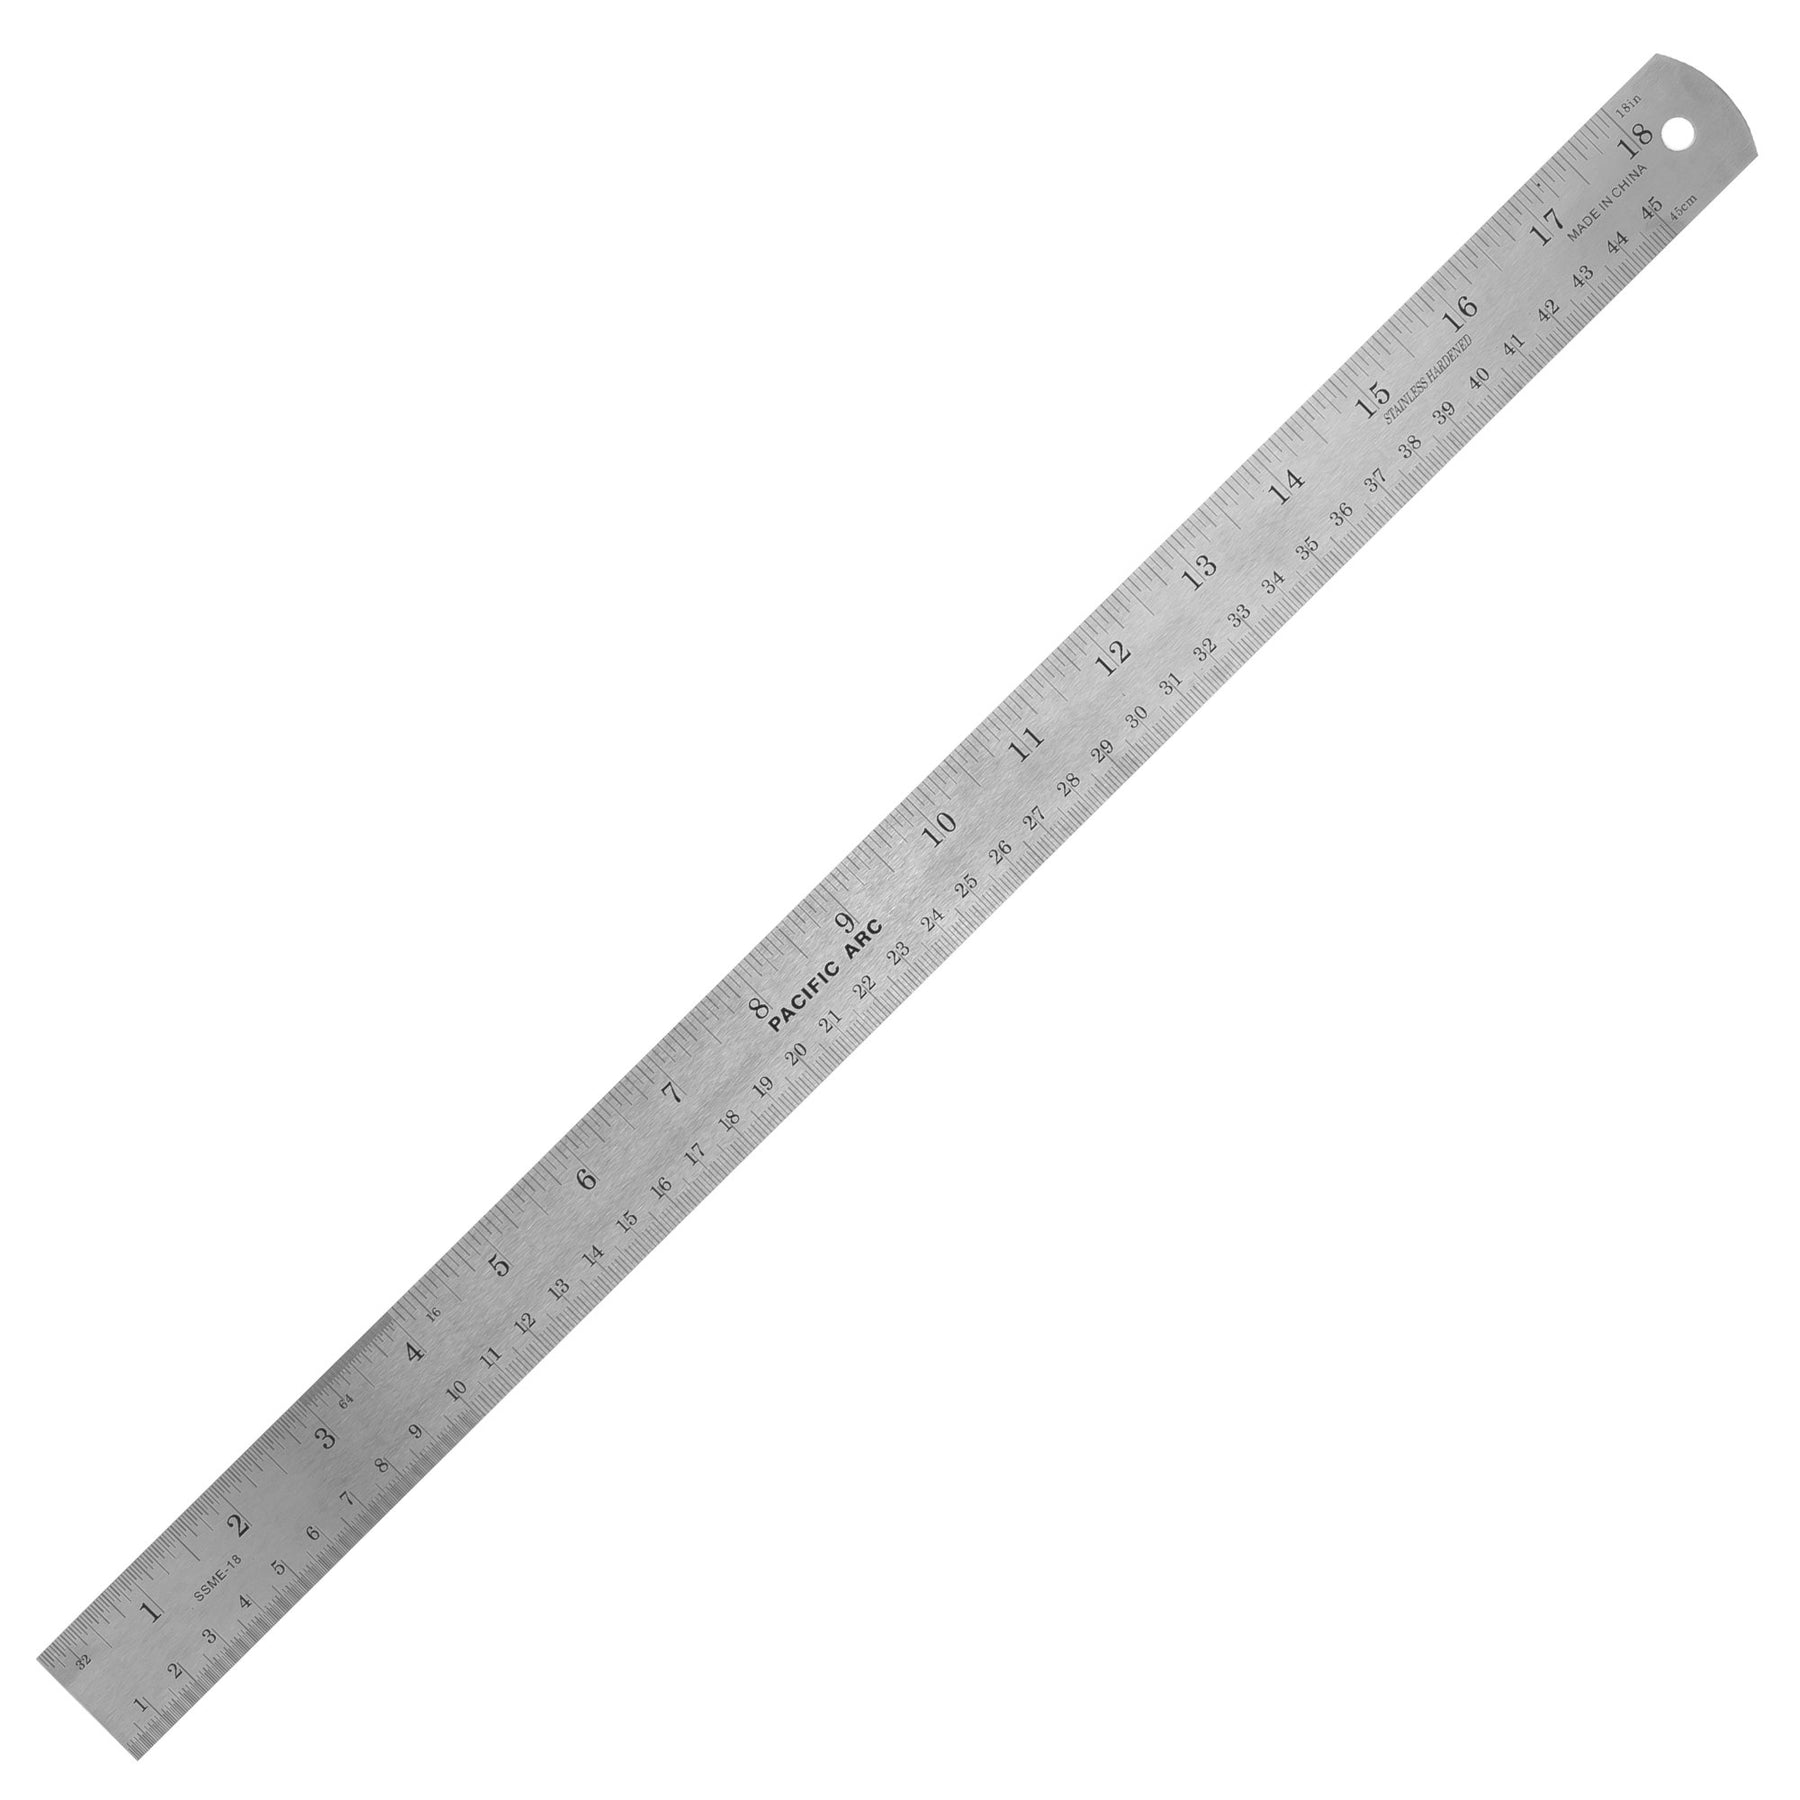 Pacific Arc ME24 Stainless Steel Corkback Ruler inch / Metric 24 inch